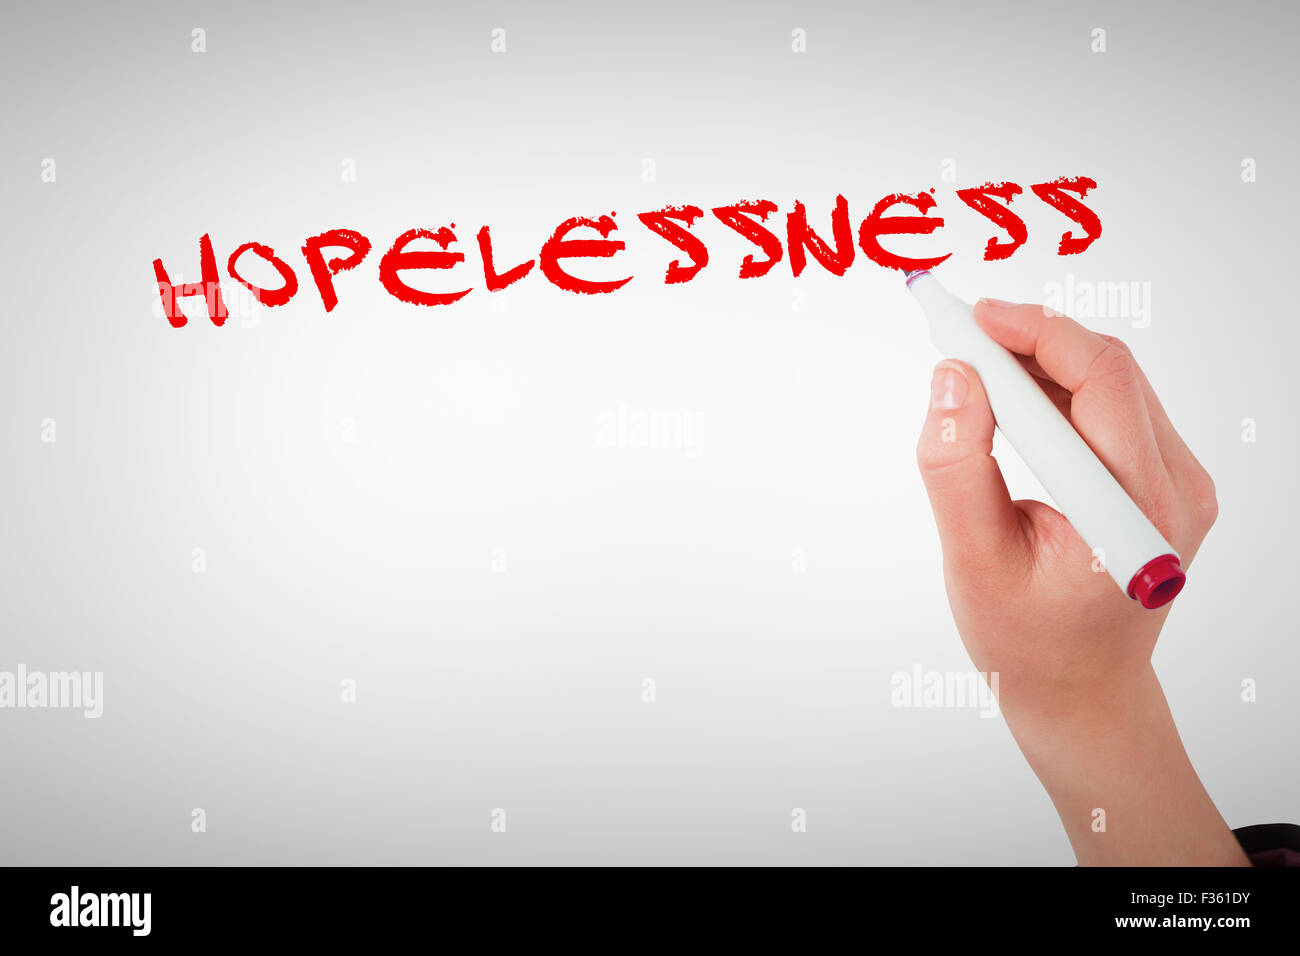 Hopelessness against businesswomans hand writing with marker Stock Photo